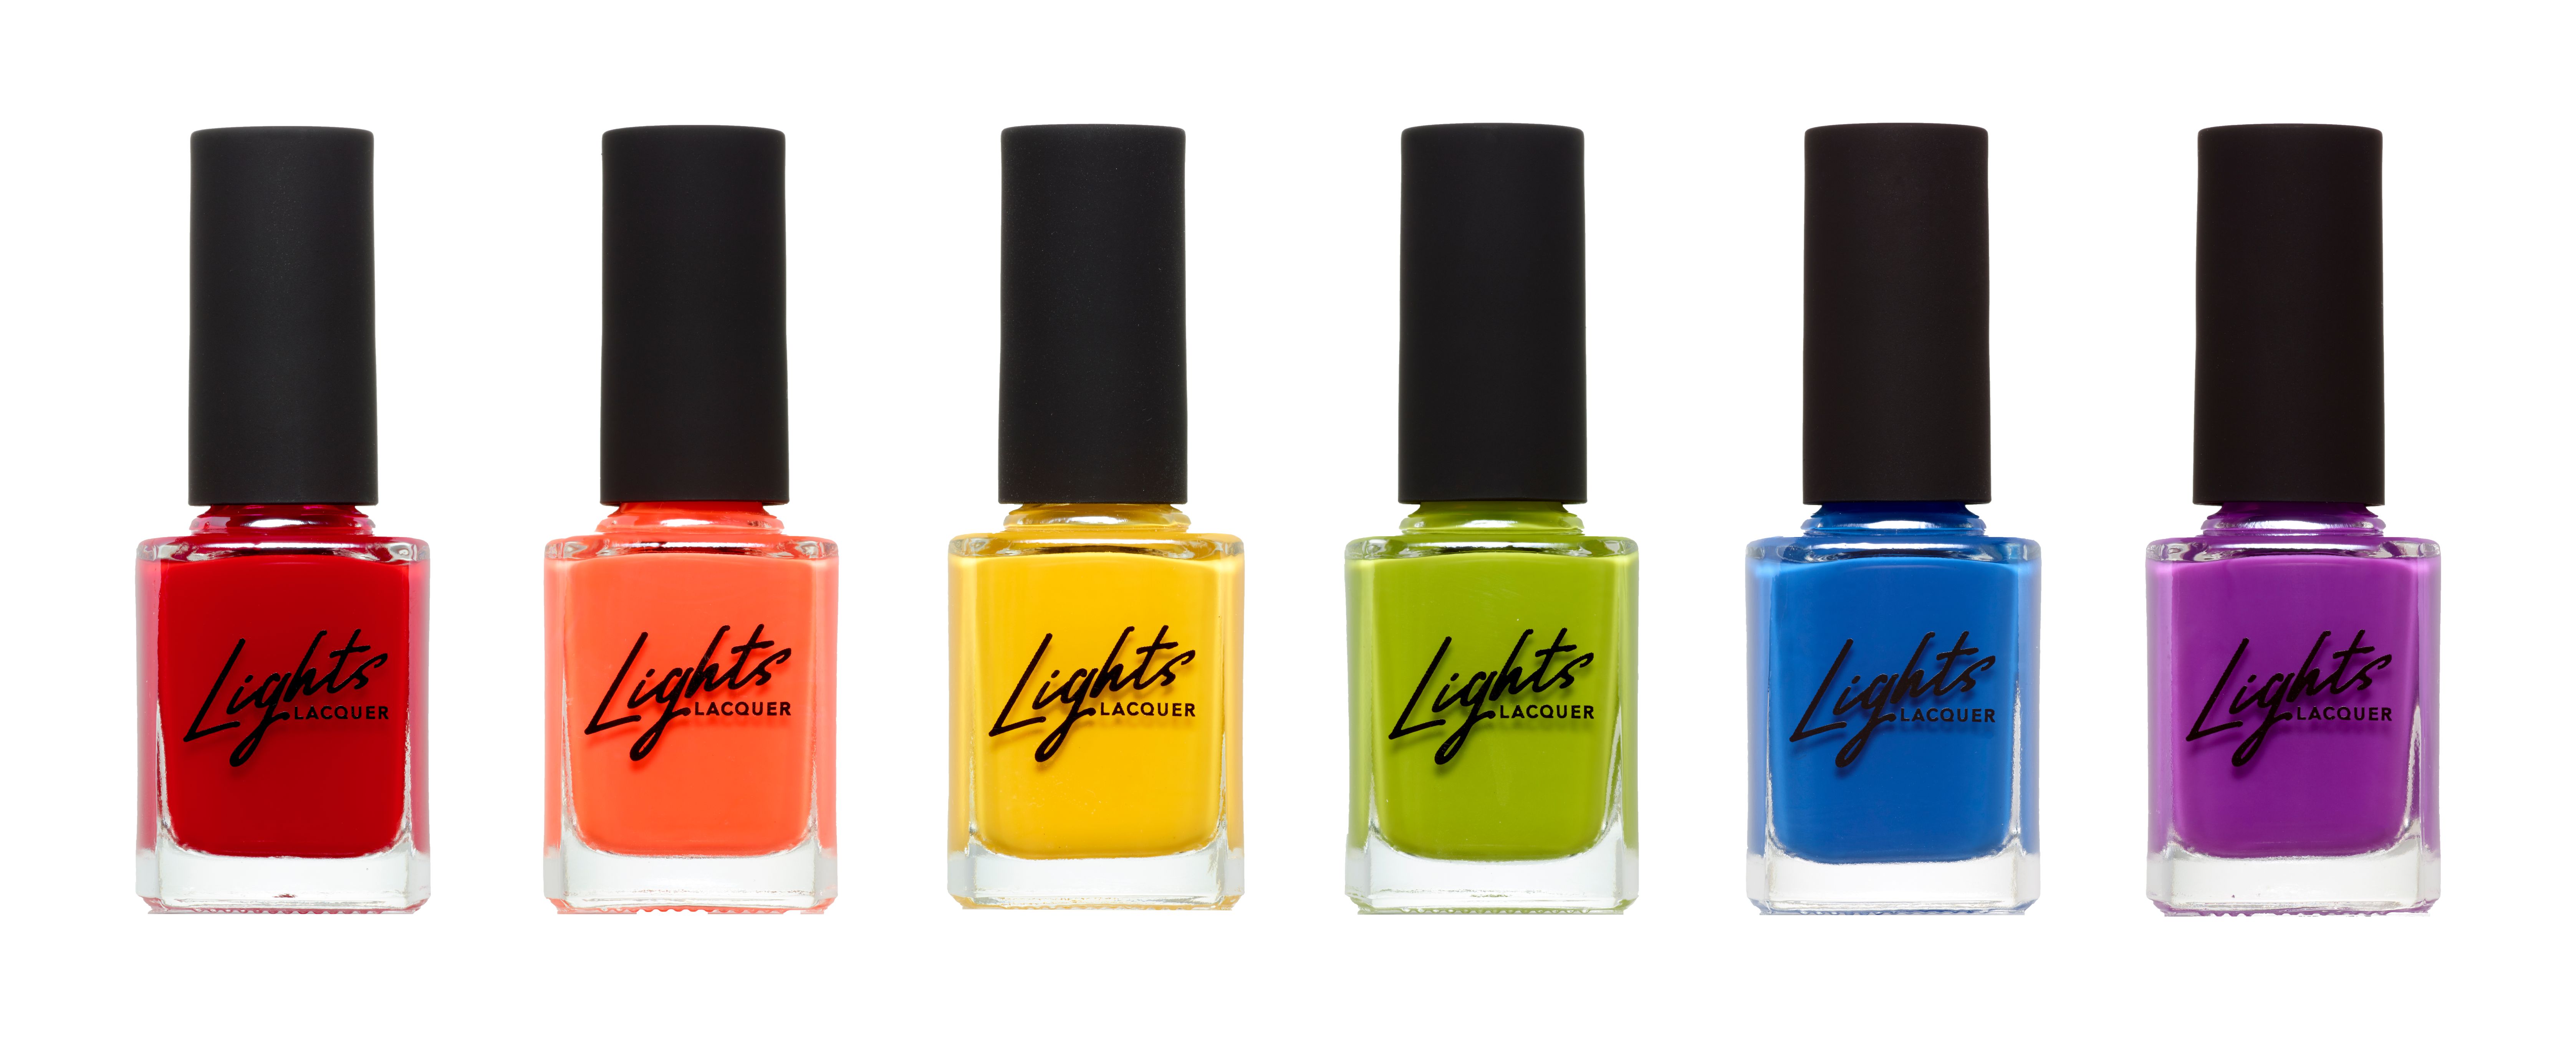 Lights Lacquer “Sweet as Summer”